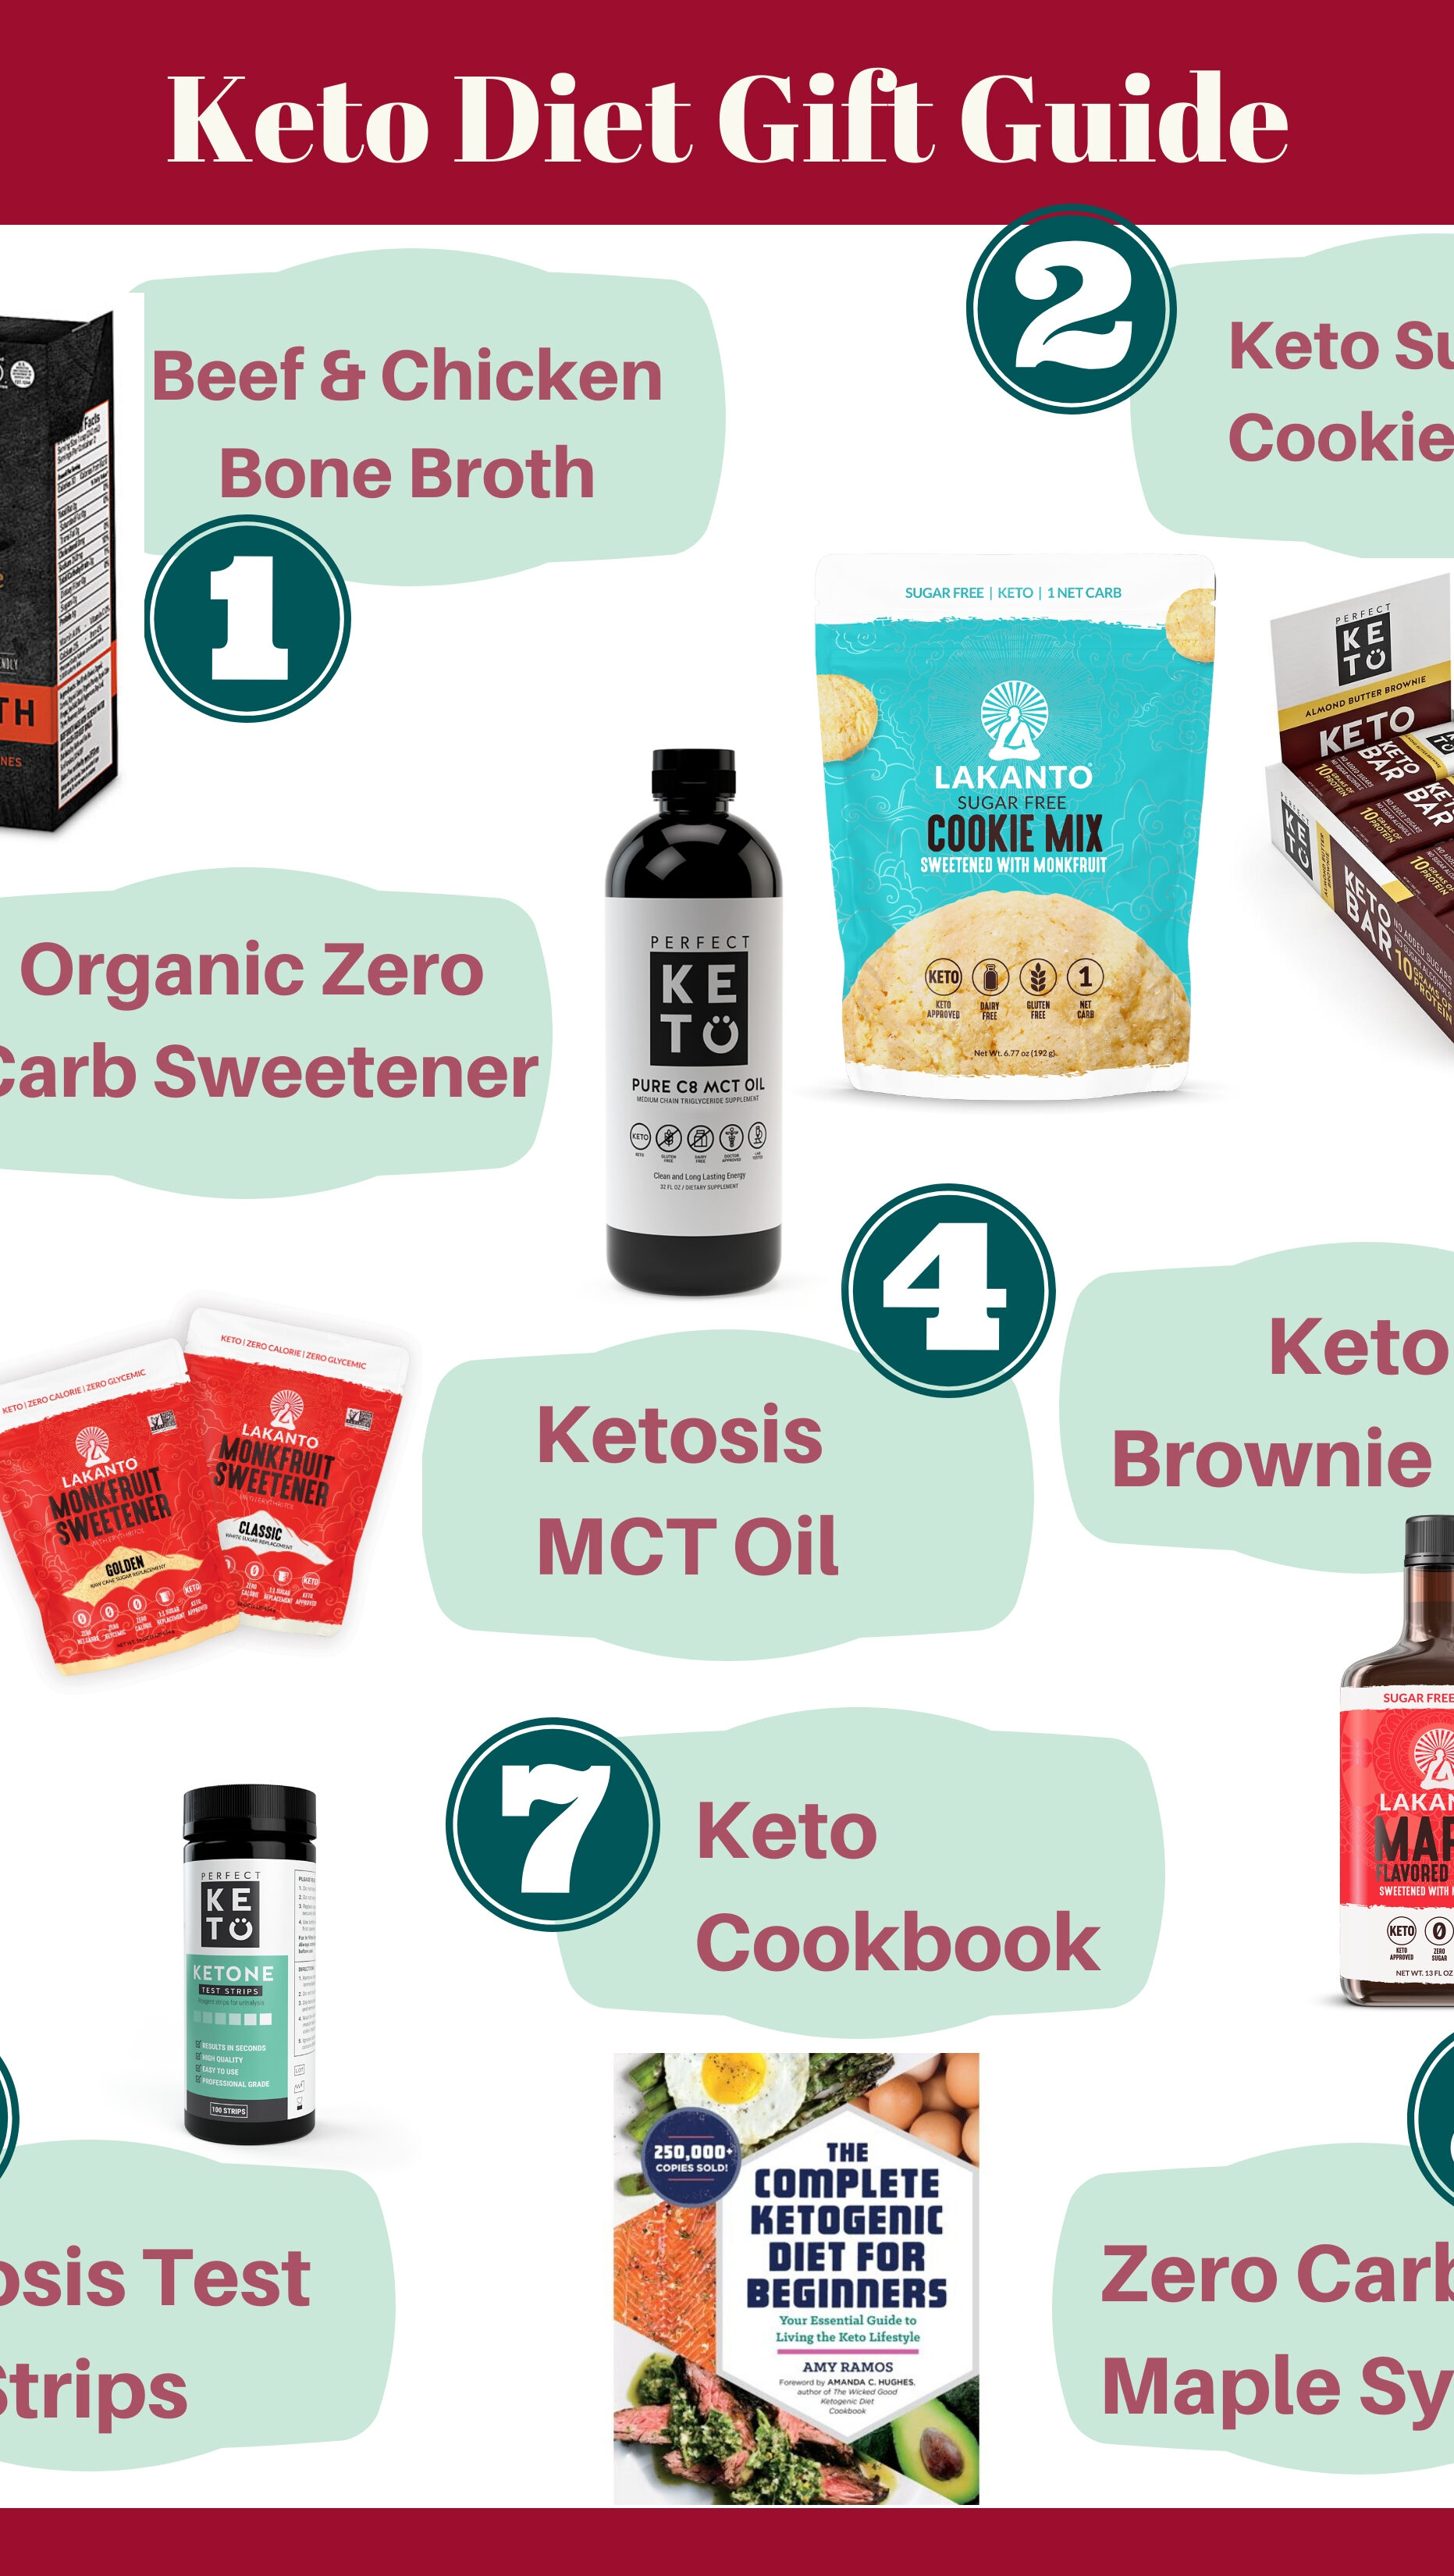 https://www.staysnatched.com/wp-content/uploads/2018/12/cropped-keto-diet-gift-guide.jpg